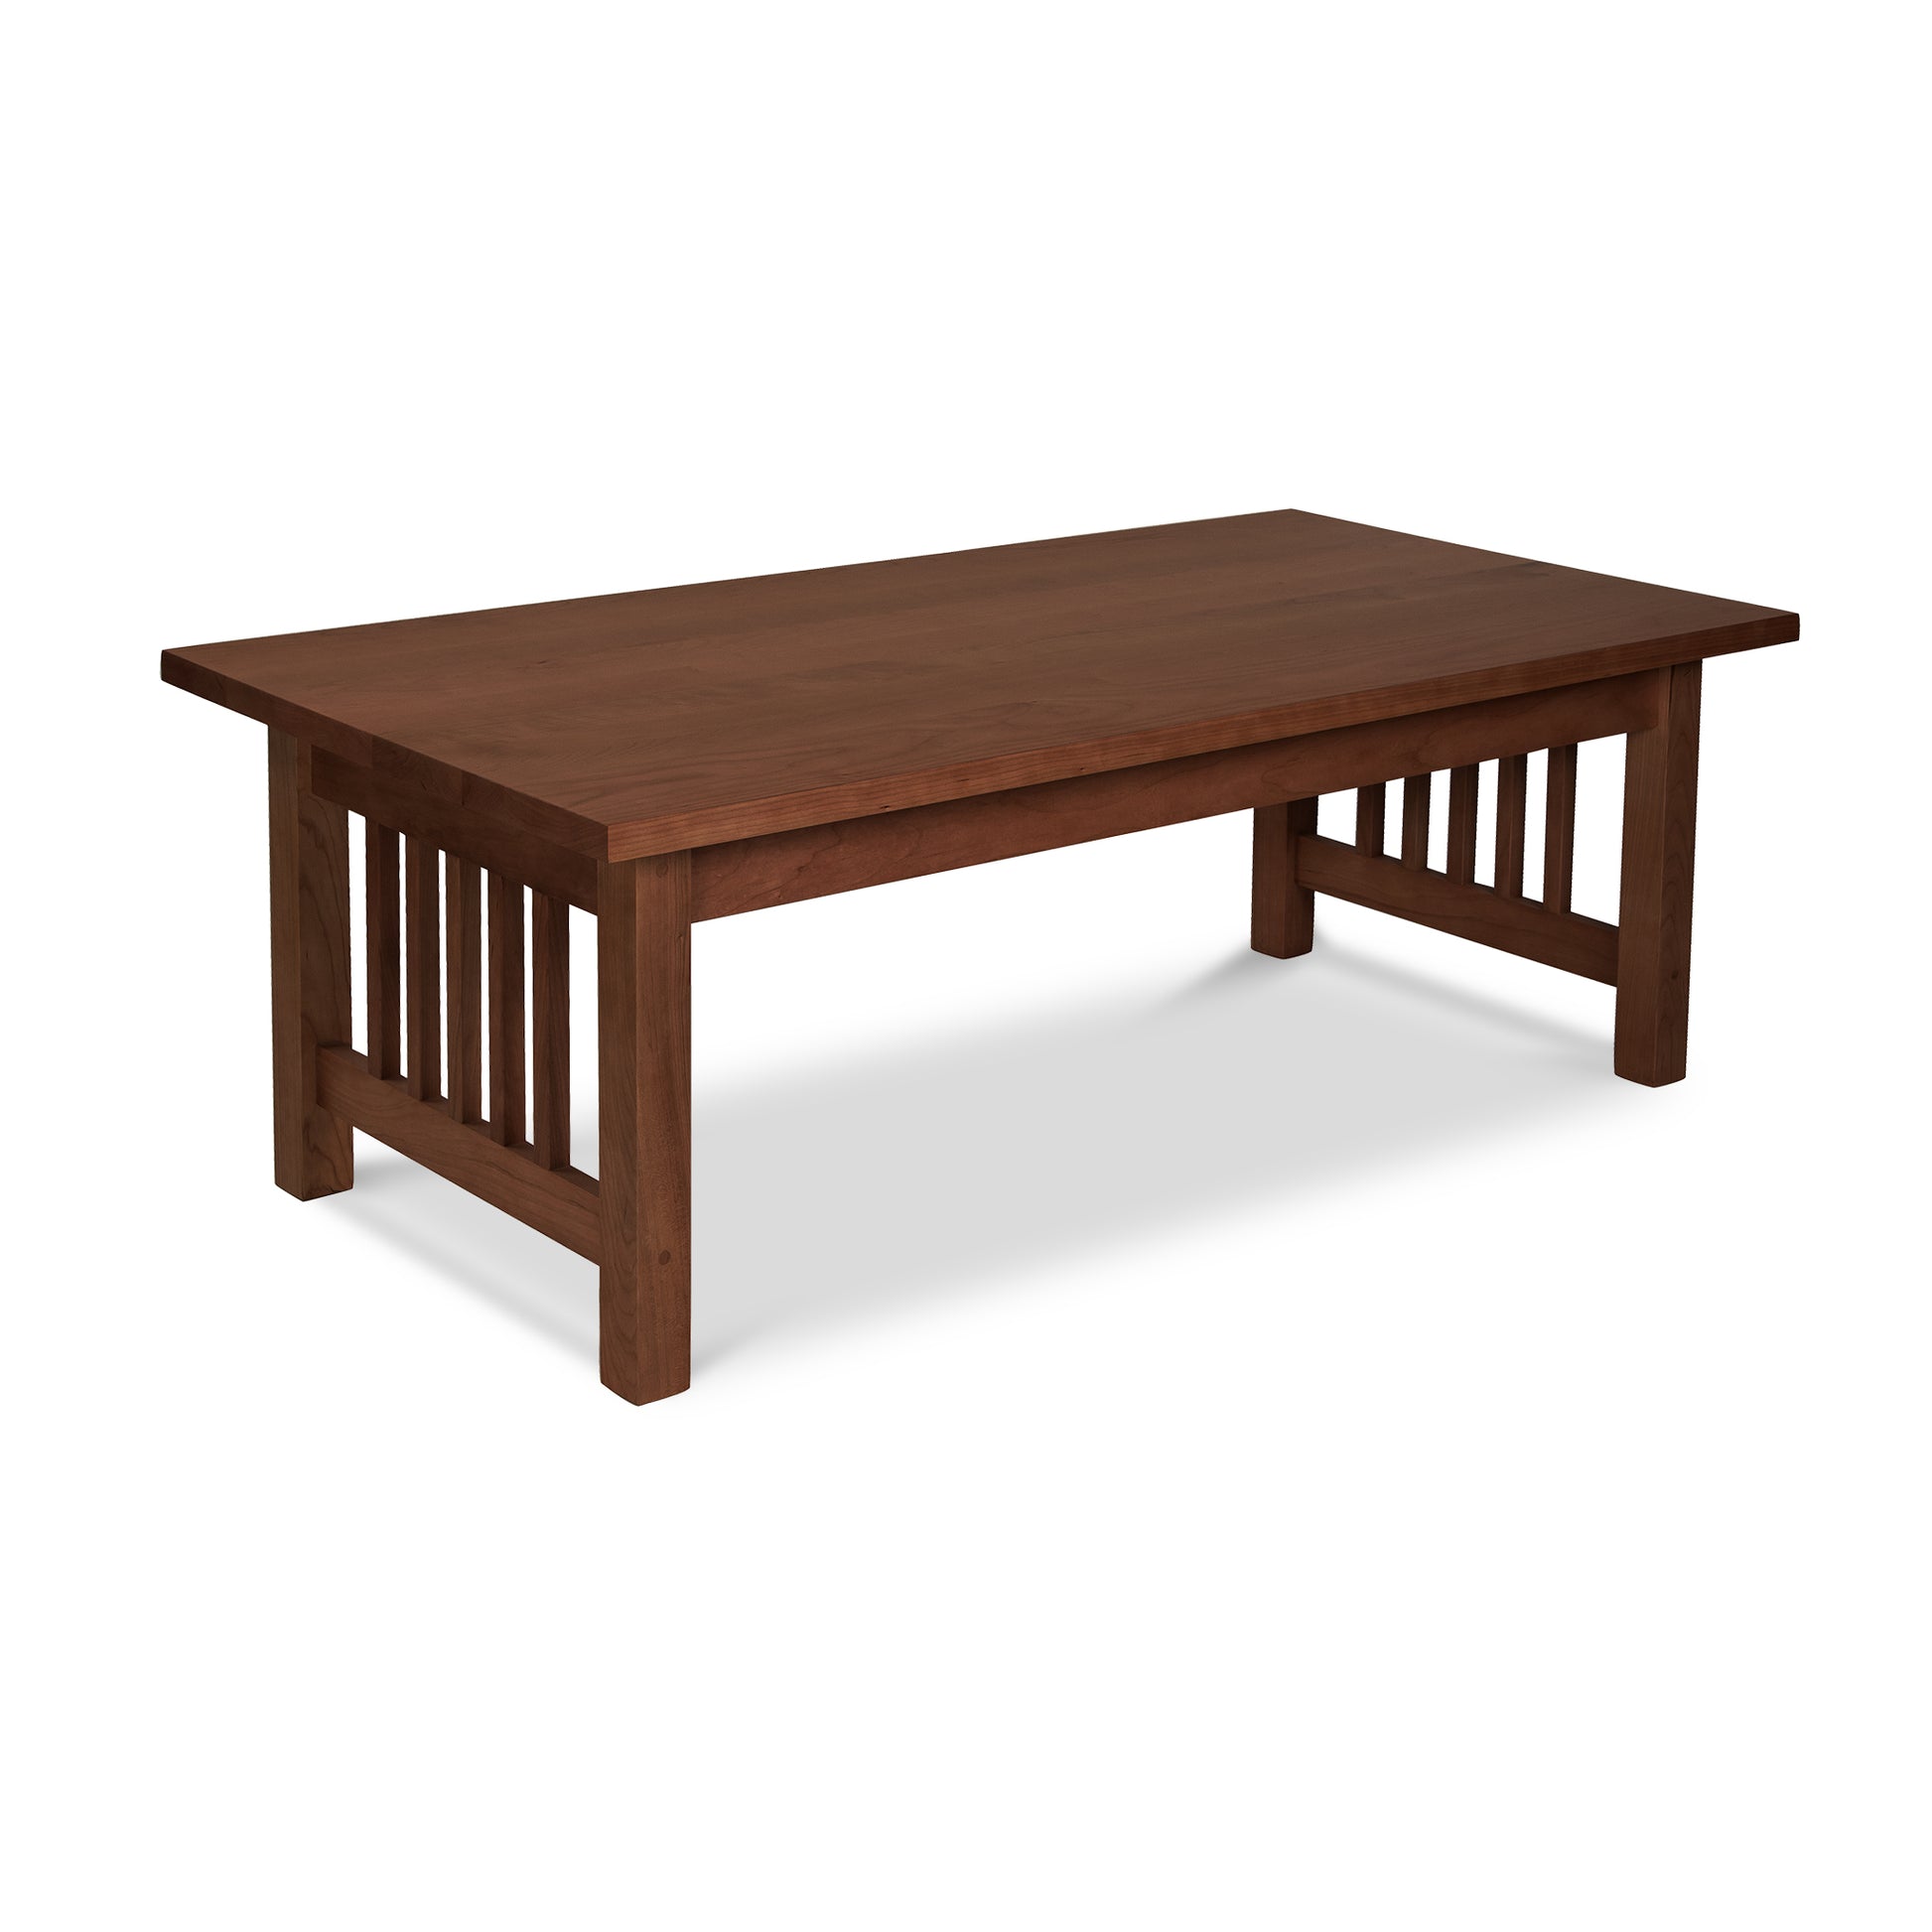 A small wooden American Mission Coffee Table by Lyndon Furniture on a white background, handcrafted and American-made.